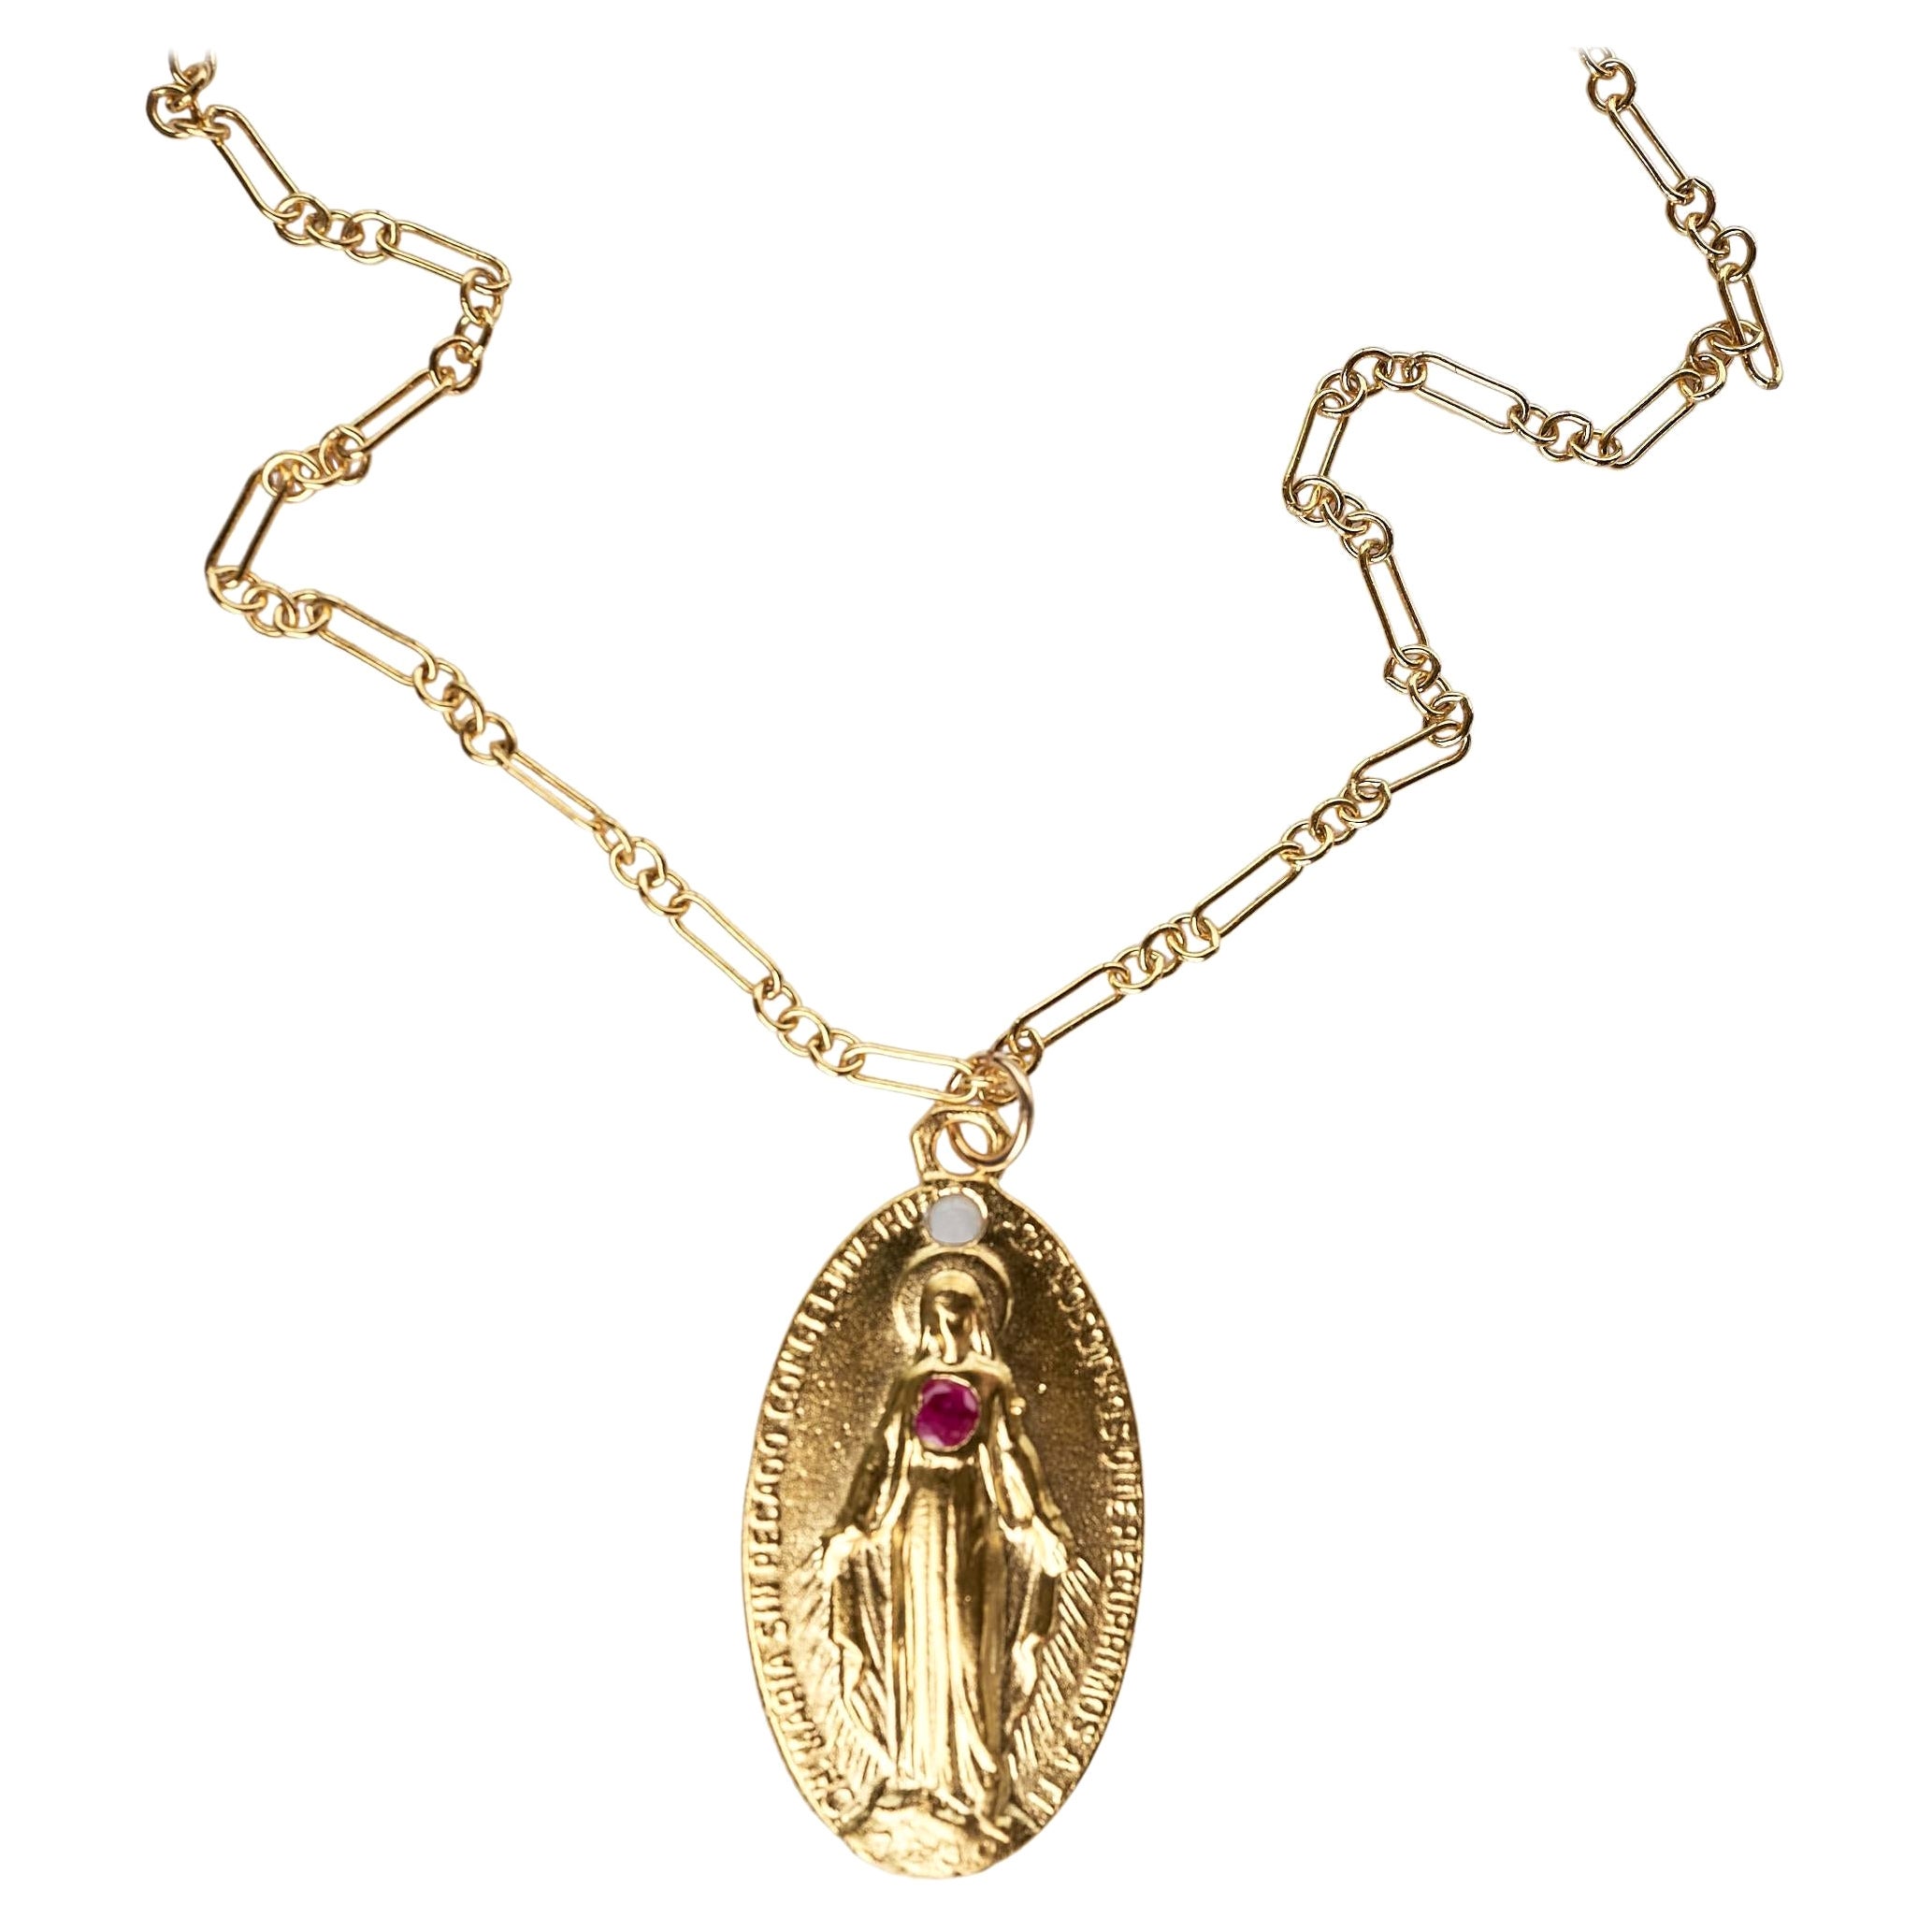 Ruby Opal Medal Virgin Mary Chain Necklace J Dauphin For Sale